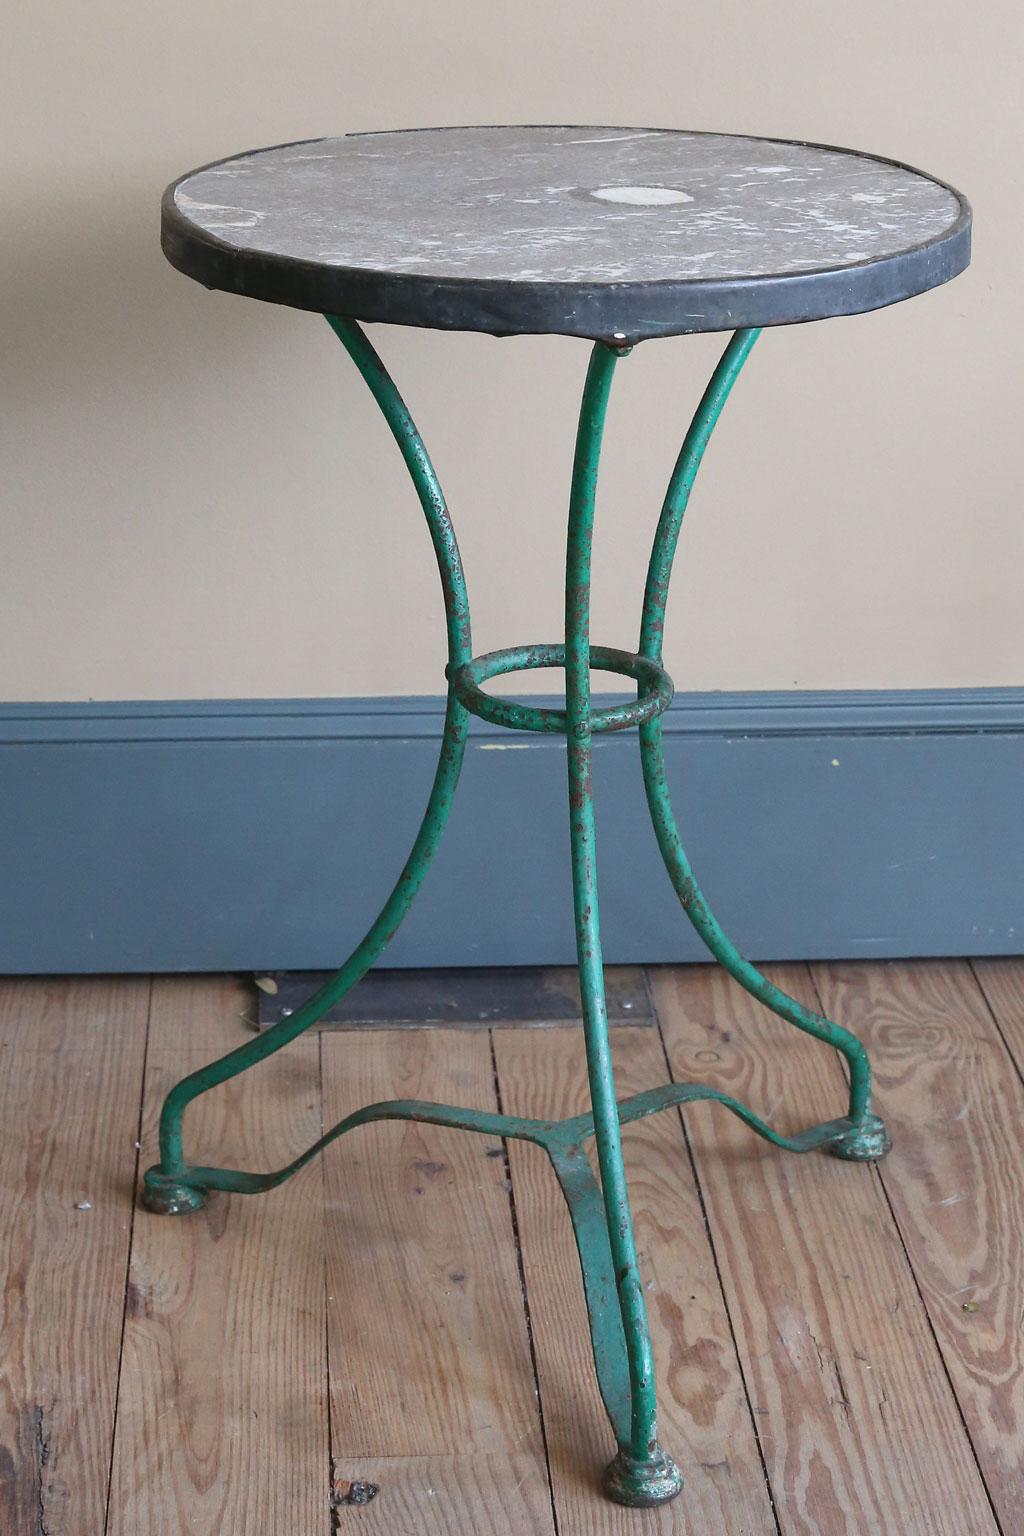 This French table has the most interestingly colored marble top. The iron base has been painted in a past life a green color. The metal banding around the table shows wear. It is original. This versatile table could be used as a small dining table,